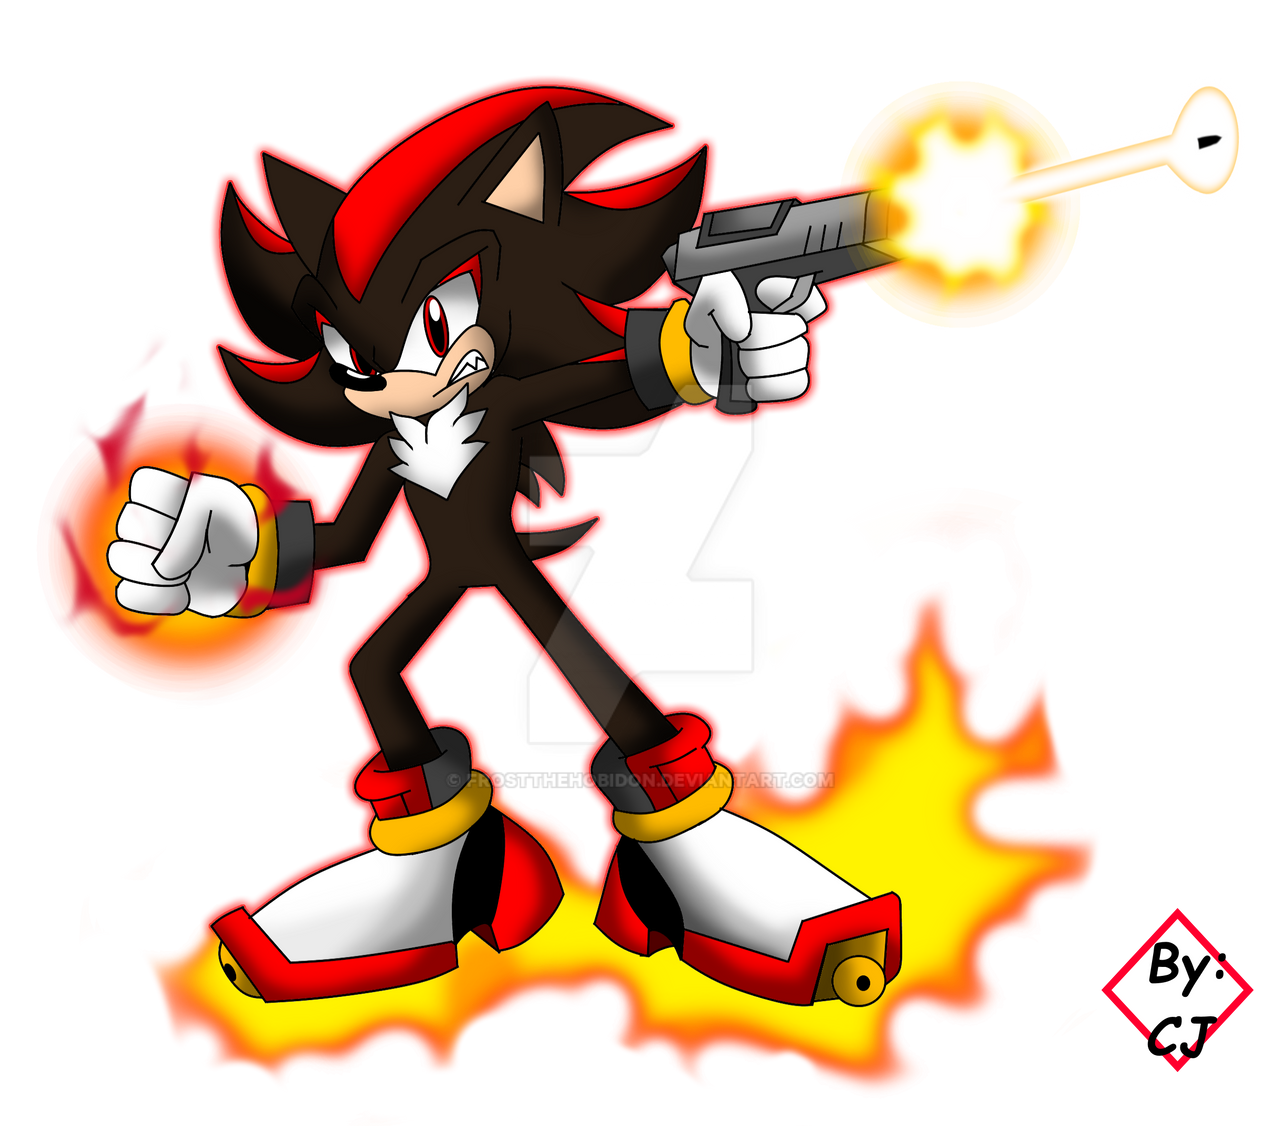 Shadow The Hedgehog must have an upgrade in his immortality status